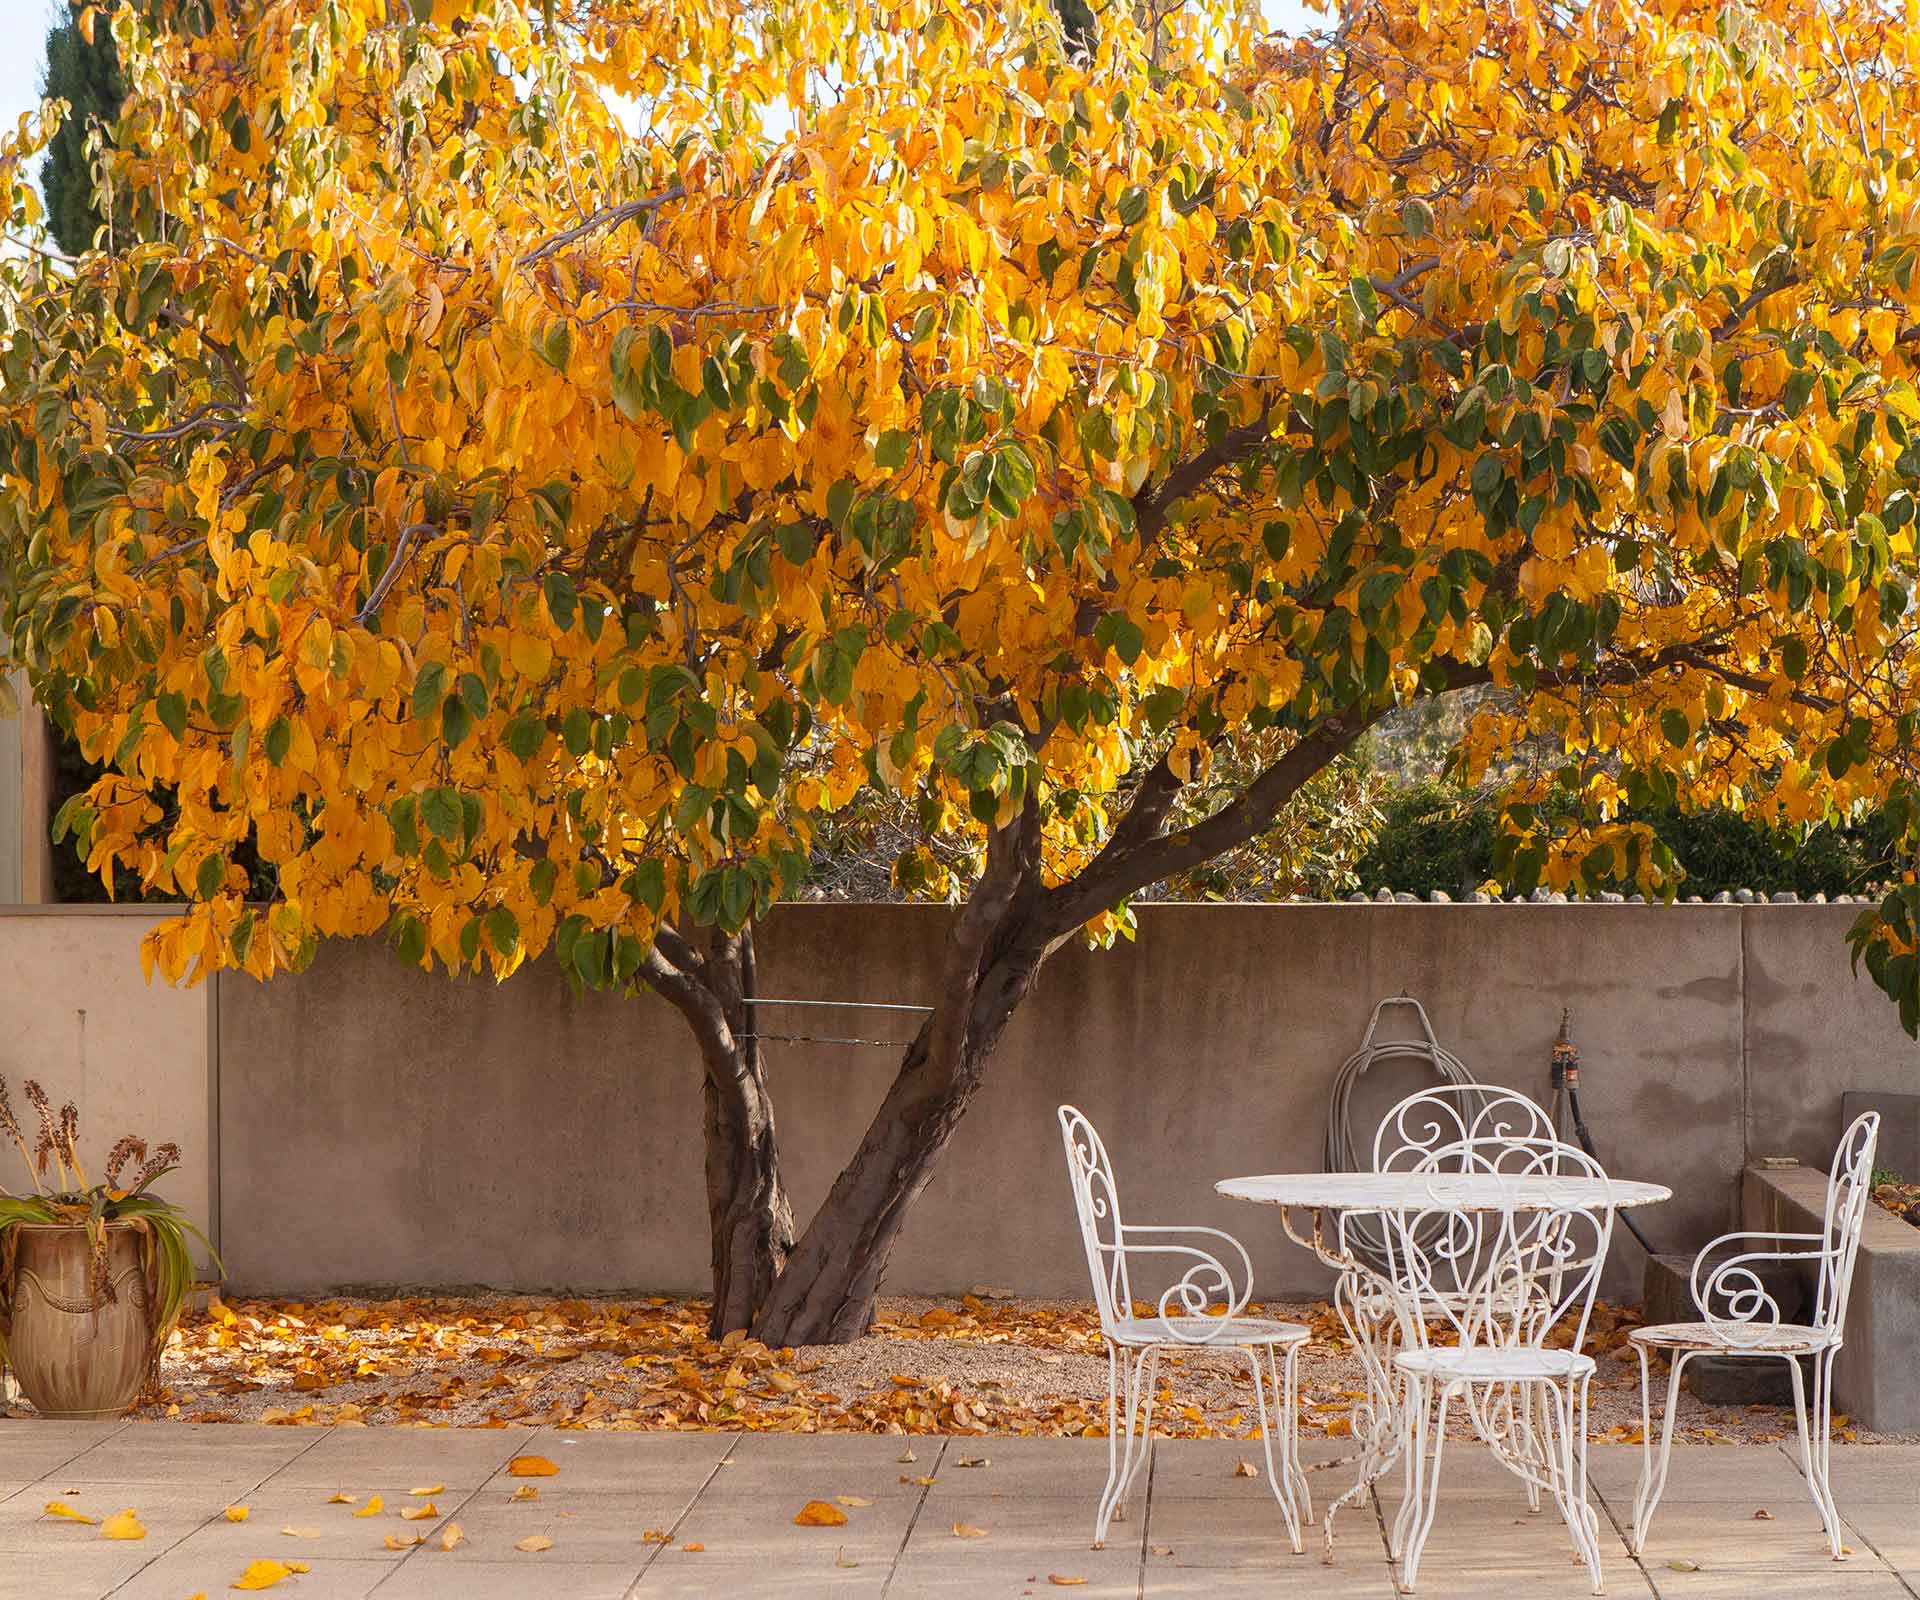 How to use all the fallen leaves in your garden this autumn